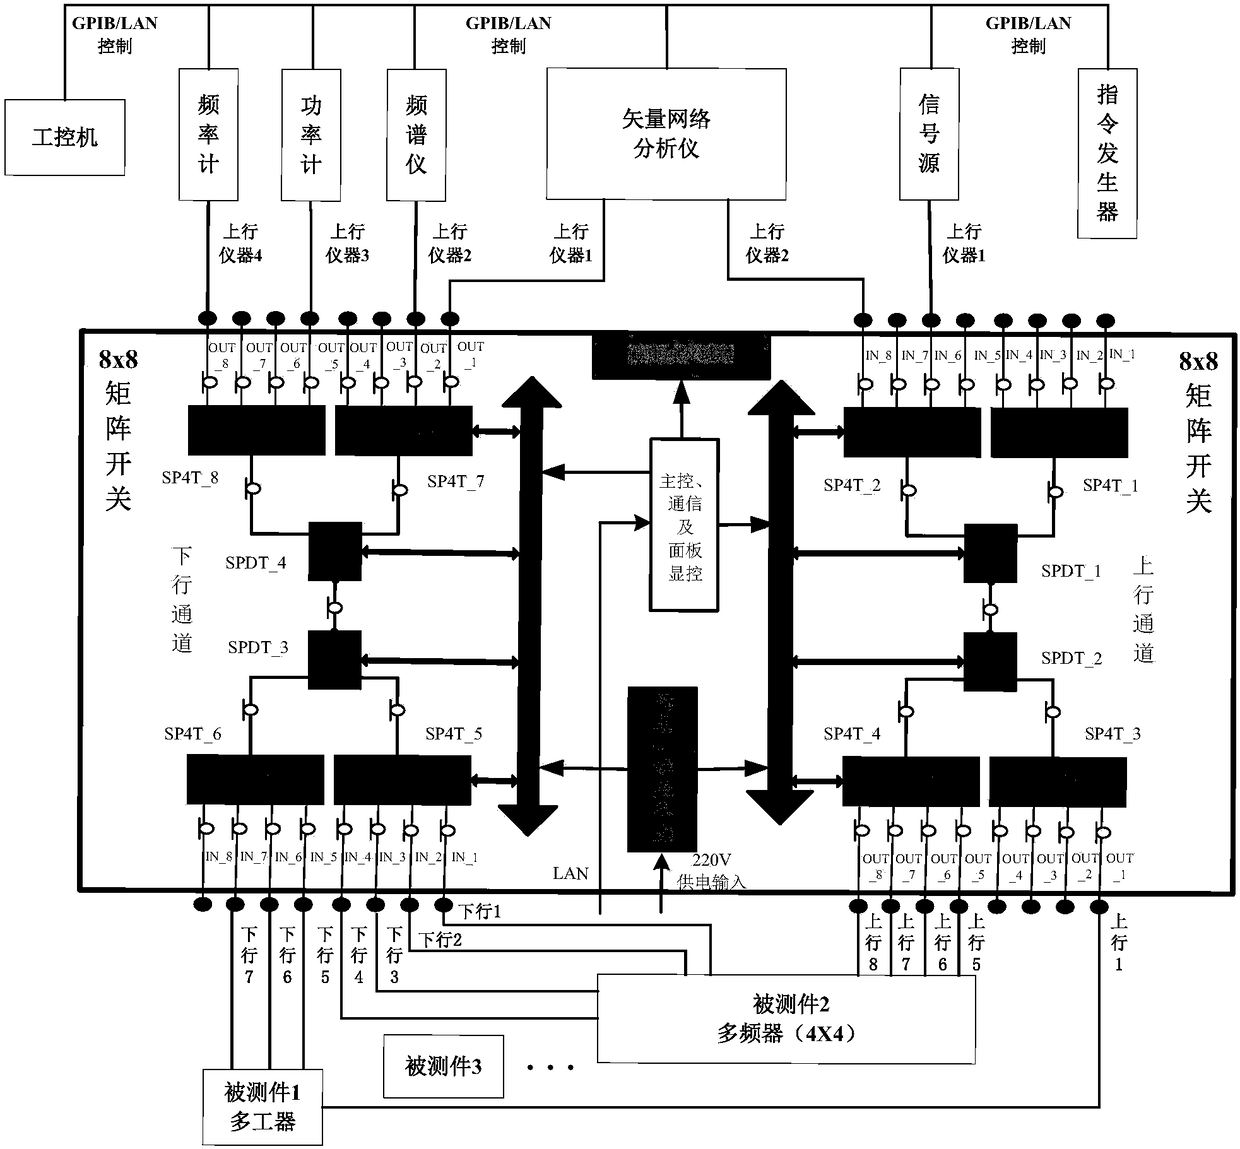 8x8 high-precision broadband millimeter-wave matrix switches and microwave parameter evaluation and calibration method